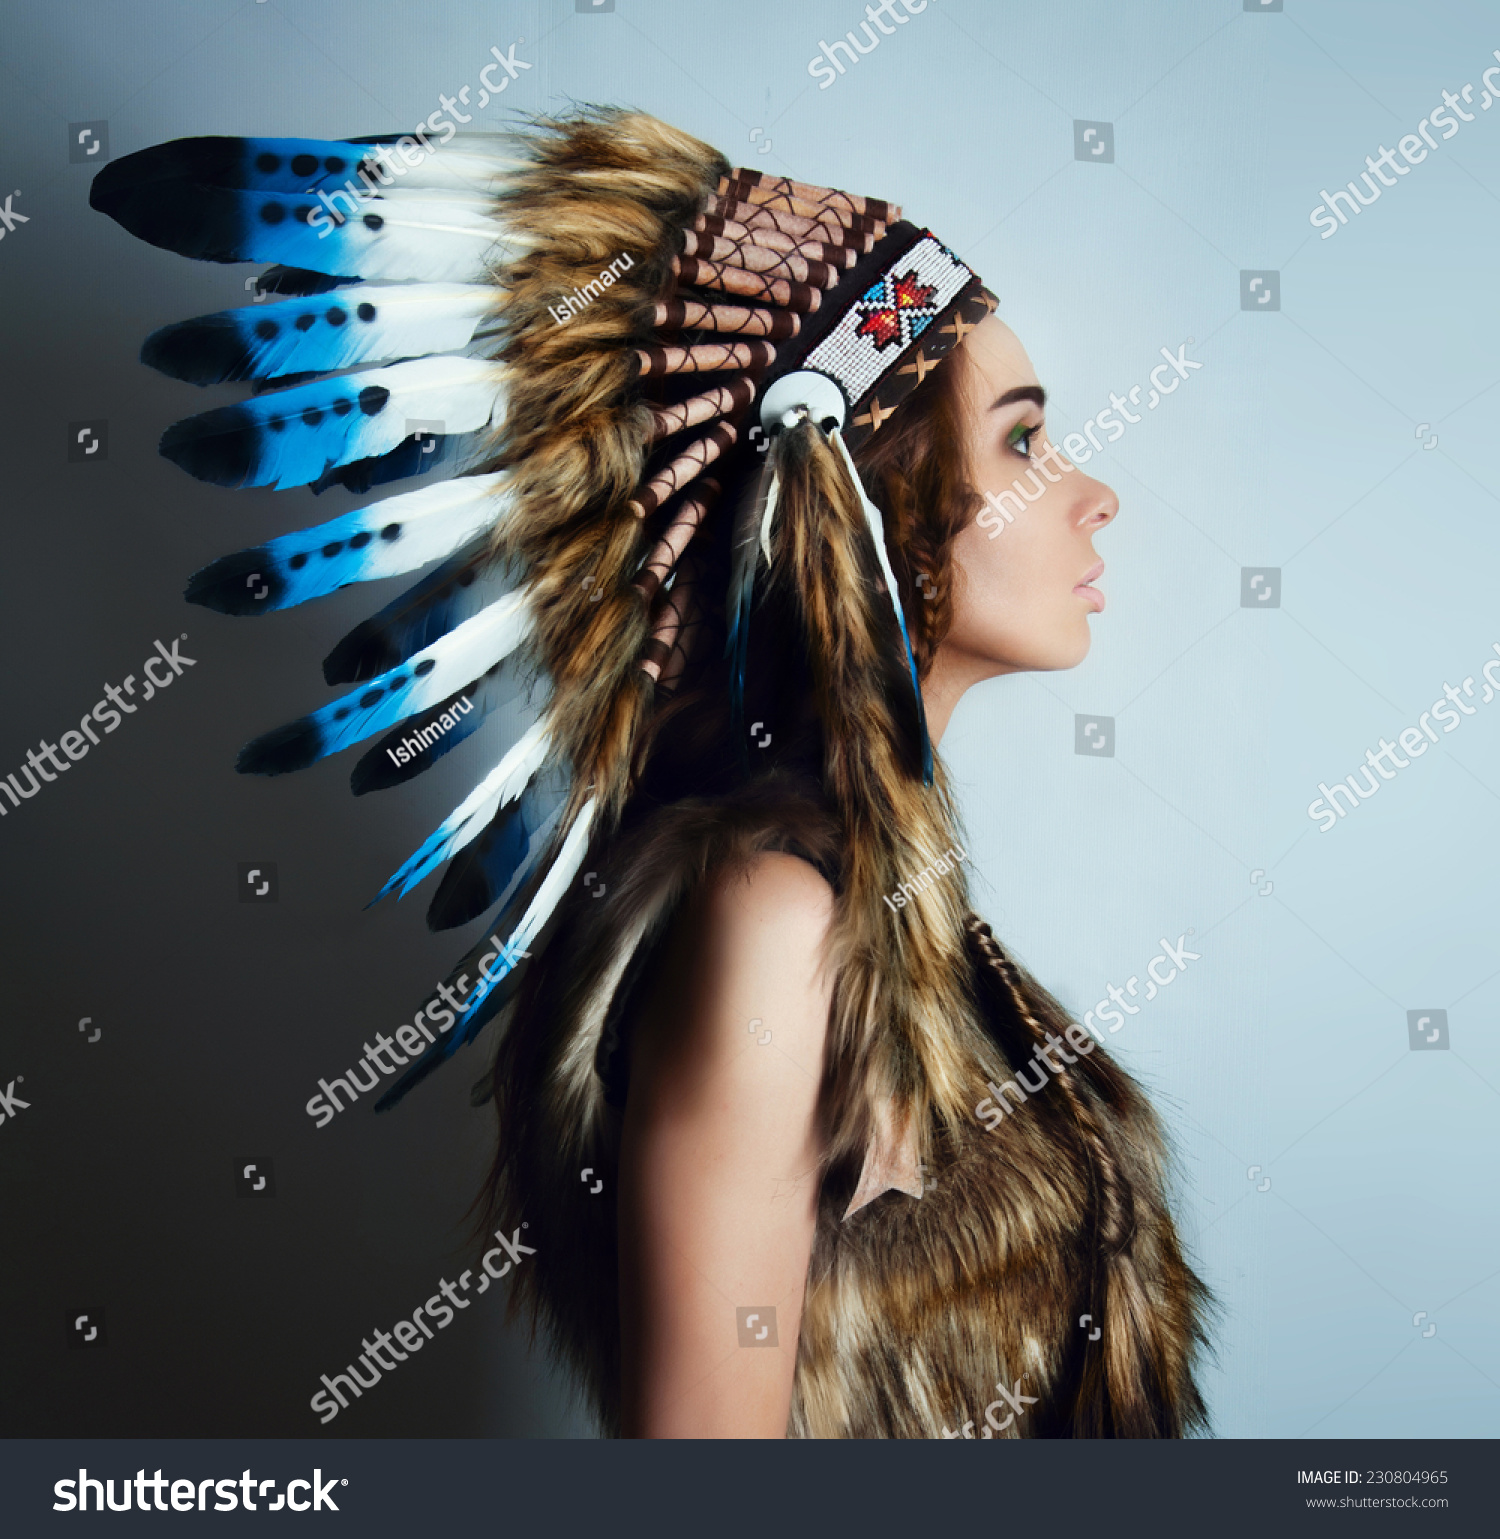 Royalty-free American Indian girl in a headdress of… #230804965 ...